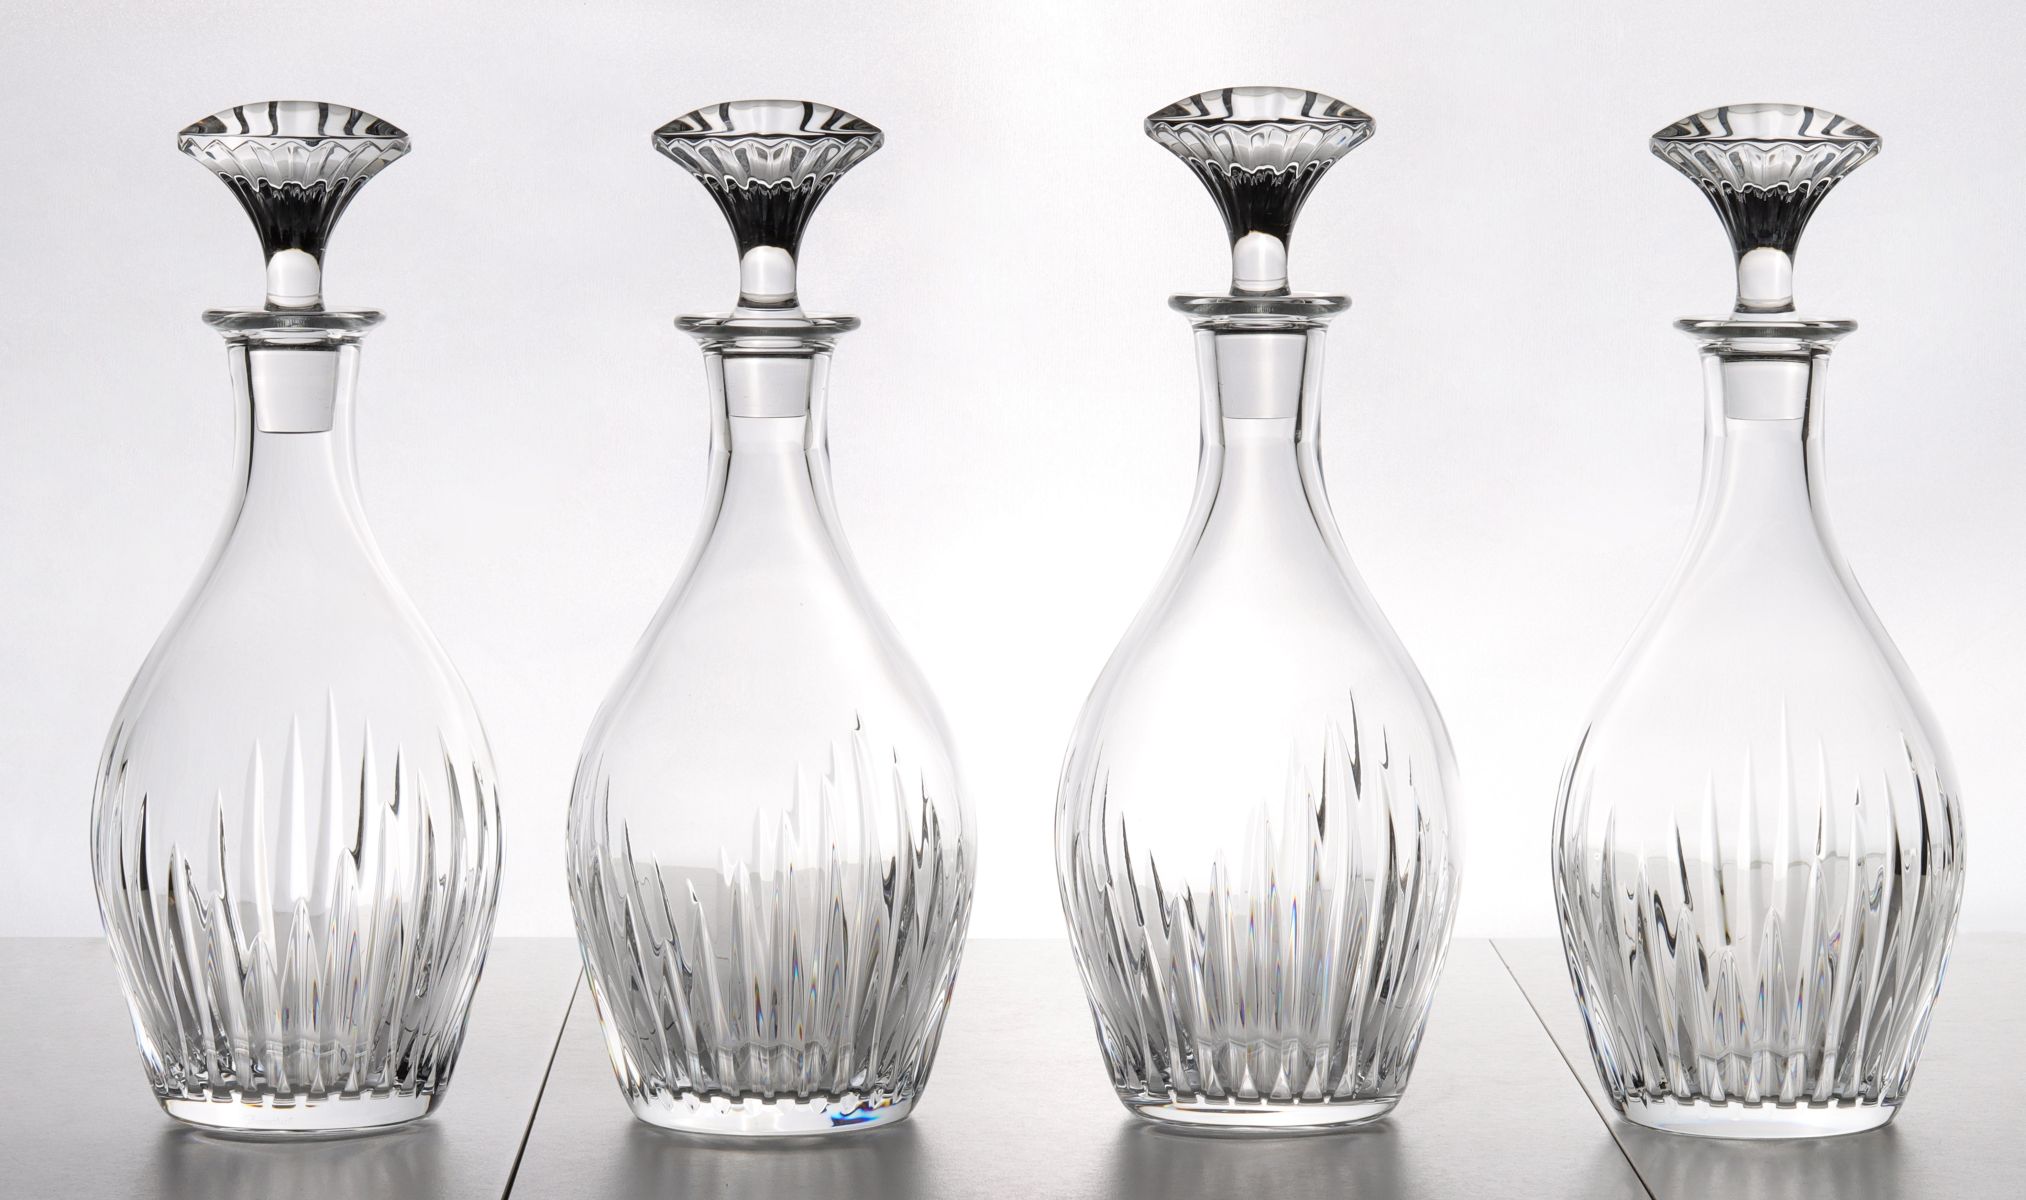 FOUR FRENCH CUT CRYSTAL DECANTERS 352b4c